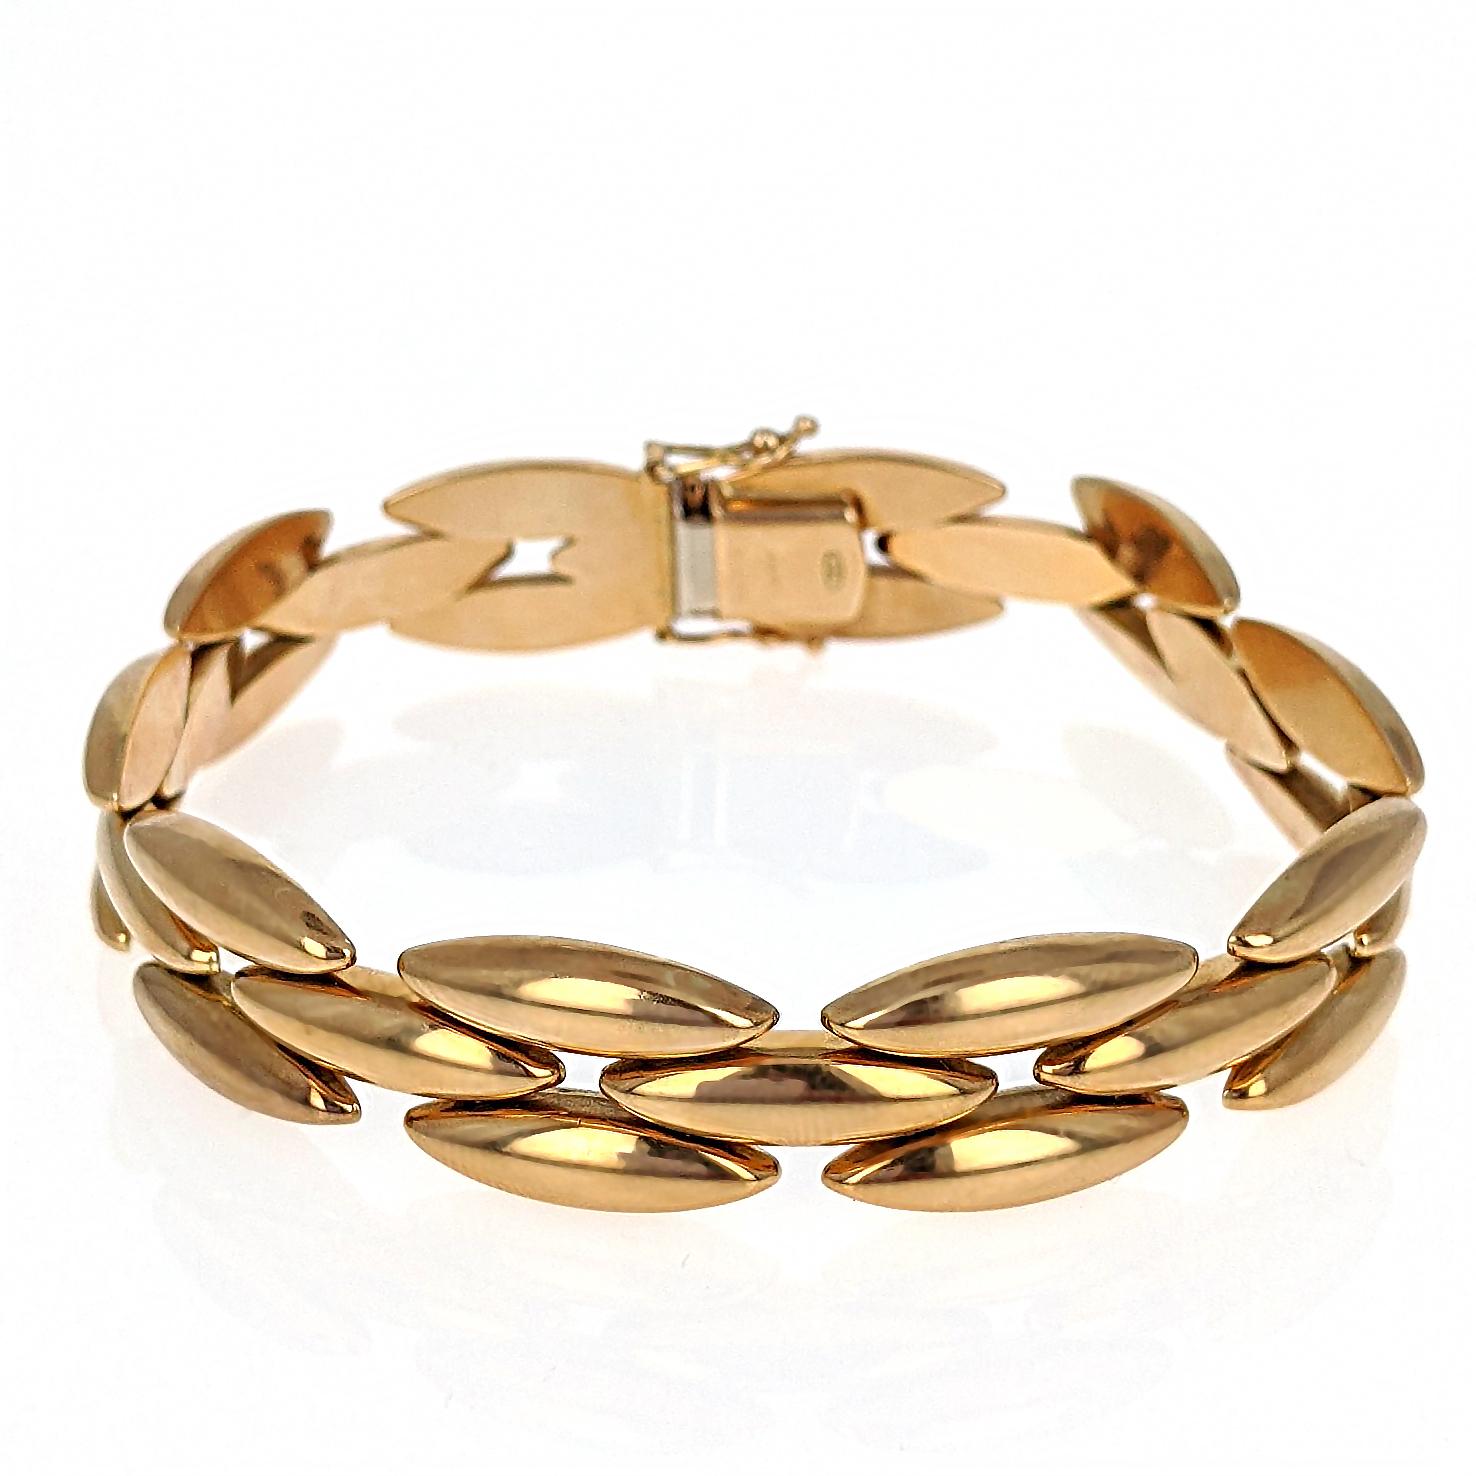 This Cartier link bracelet is designed as a modified tank bracelet with three rows of elongated oval gentiane rice links and is mounted in 18 karat yellow gold. It has a box clasp closure with two safety clasps. It is signed, numbered, with Italian